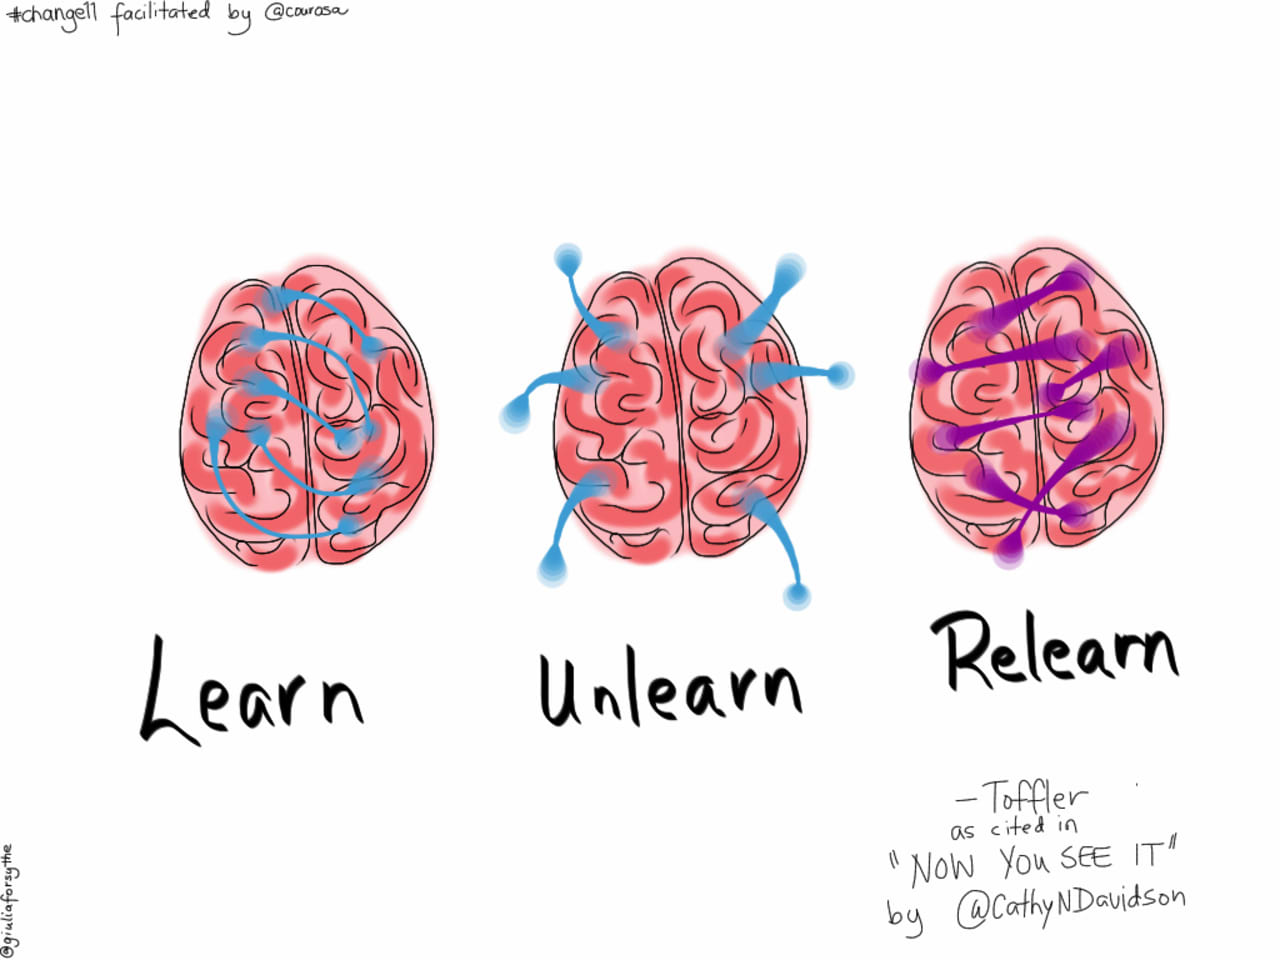 The ability to learn, unlearn, and relearn is critical.